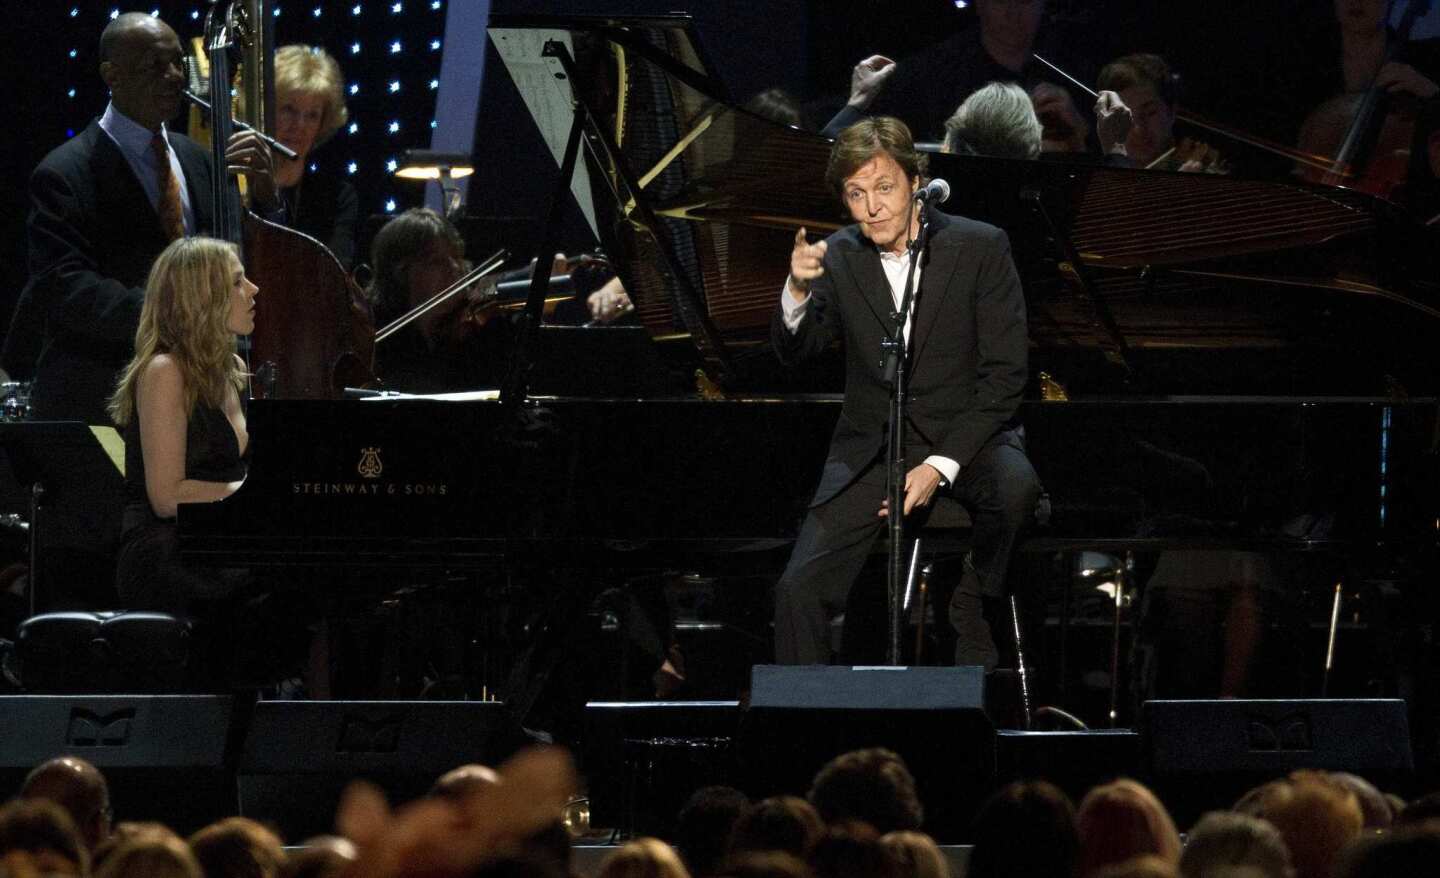 Paul McCartney points to his new wife Nancy in the audience while singing a new ballad, "My Valentine."